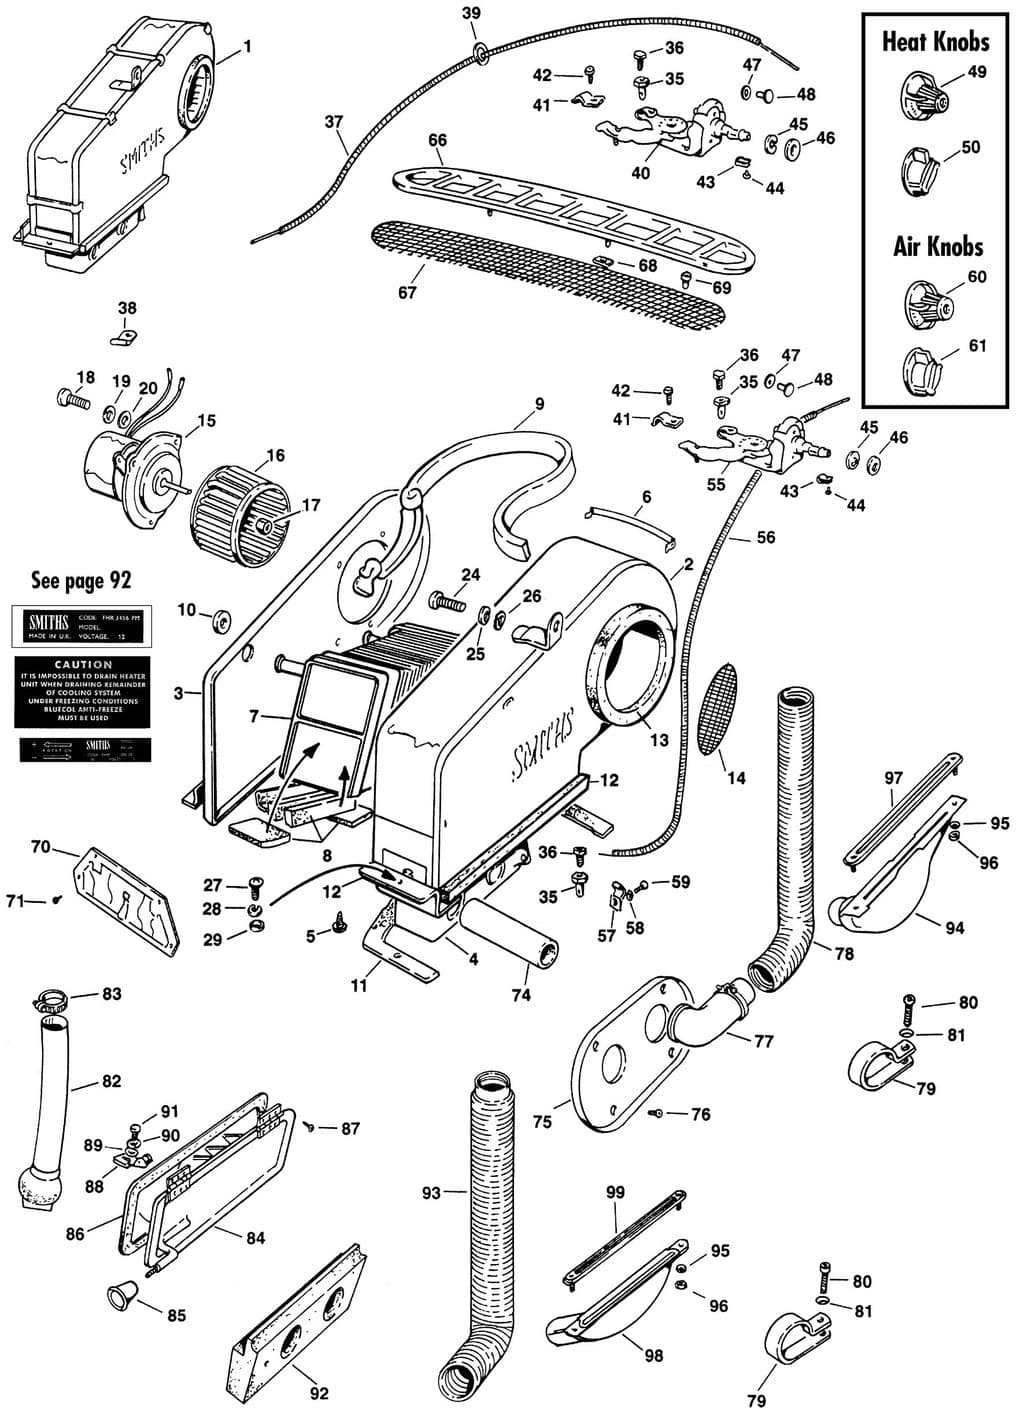 MGC 1967-1969 - AC & heater controls | Webshop Anglo Parts - Heater system - 1